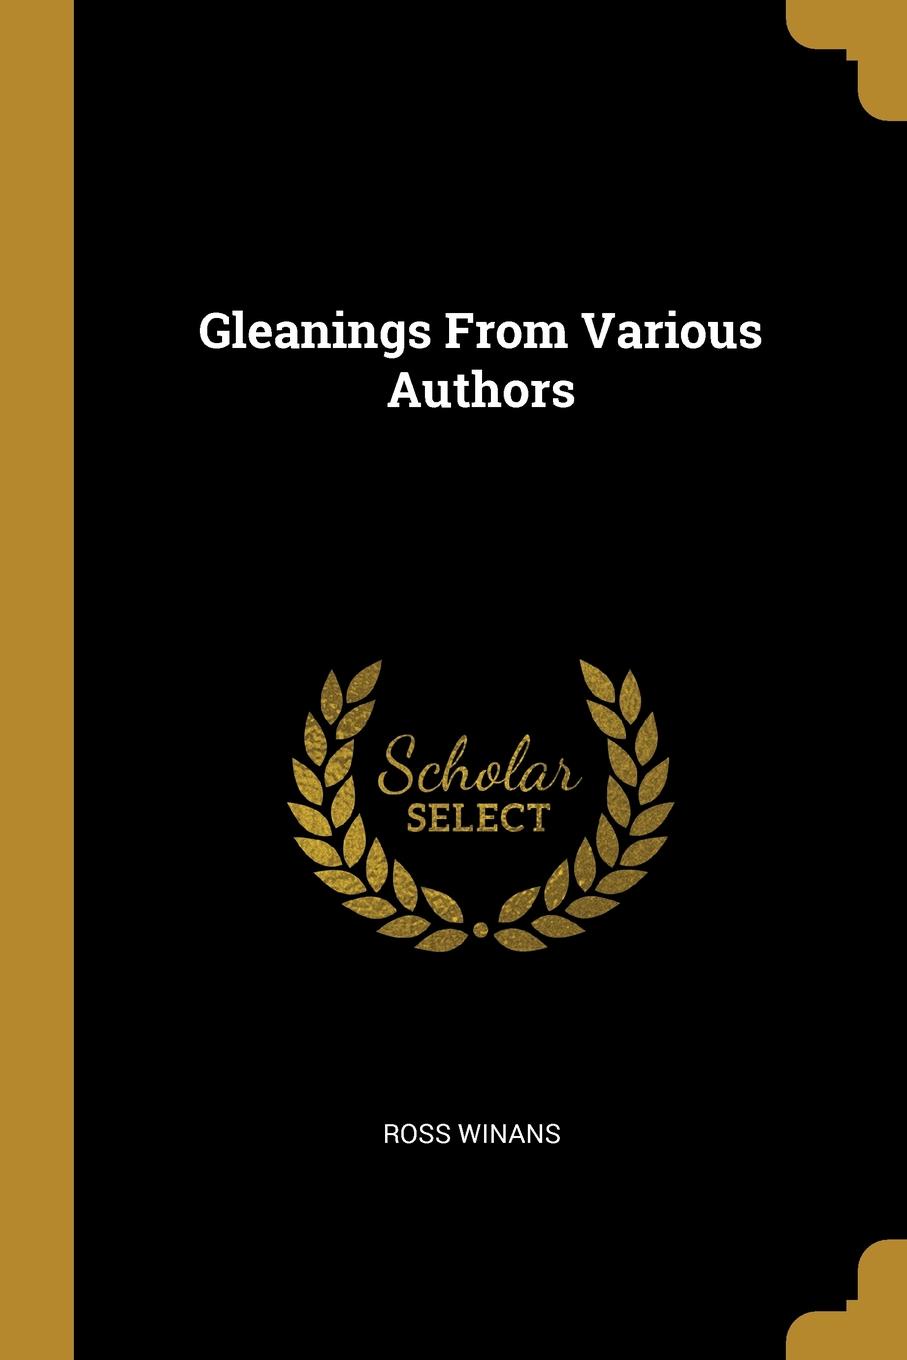 Gleanings From Various Authors